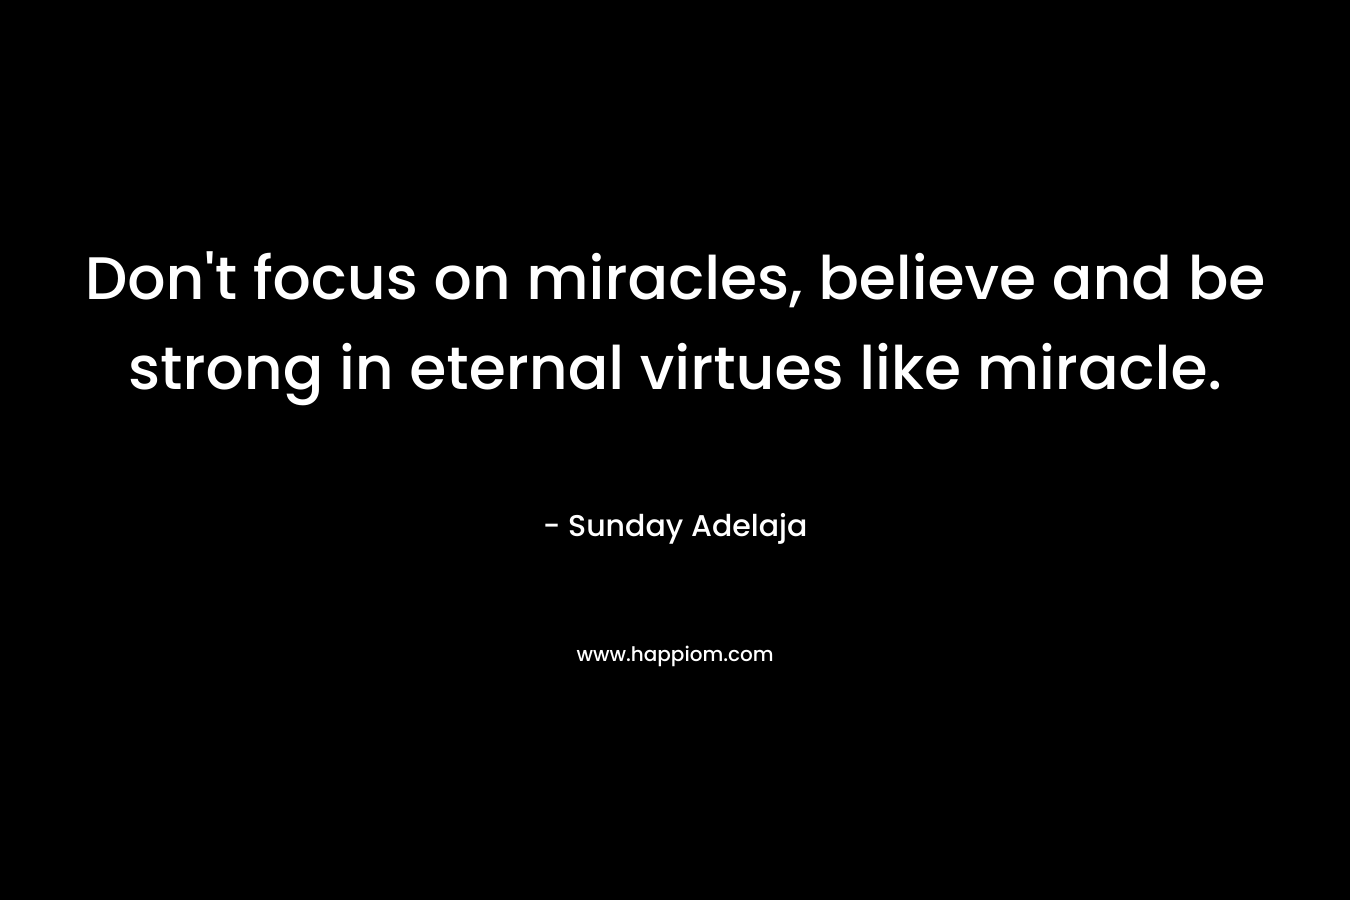 Don't focus on miracles, believe and be strong in eternal virtues like miracle.